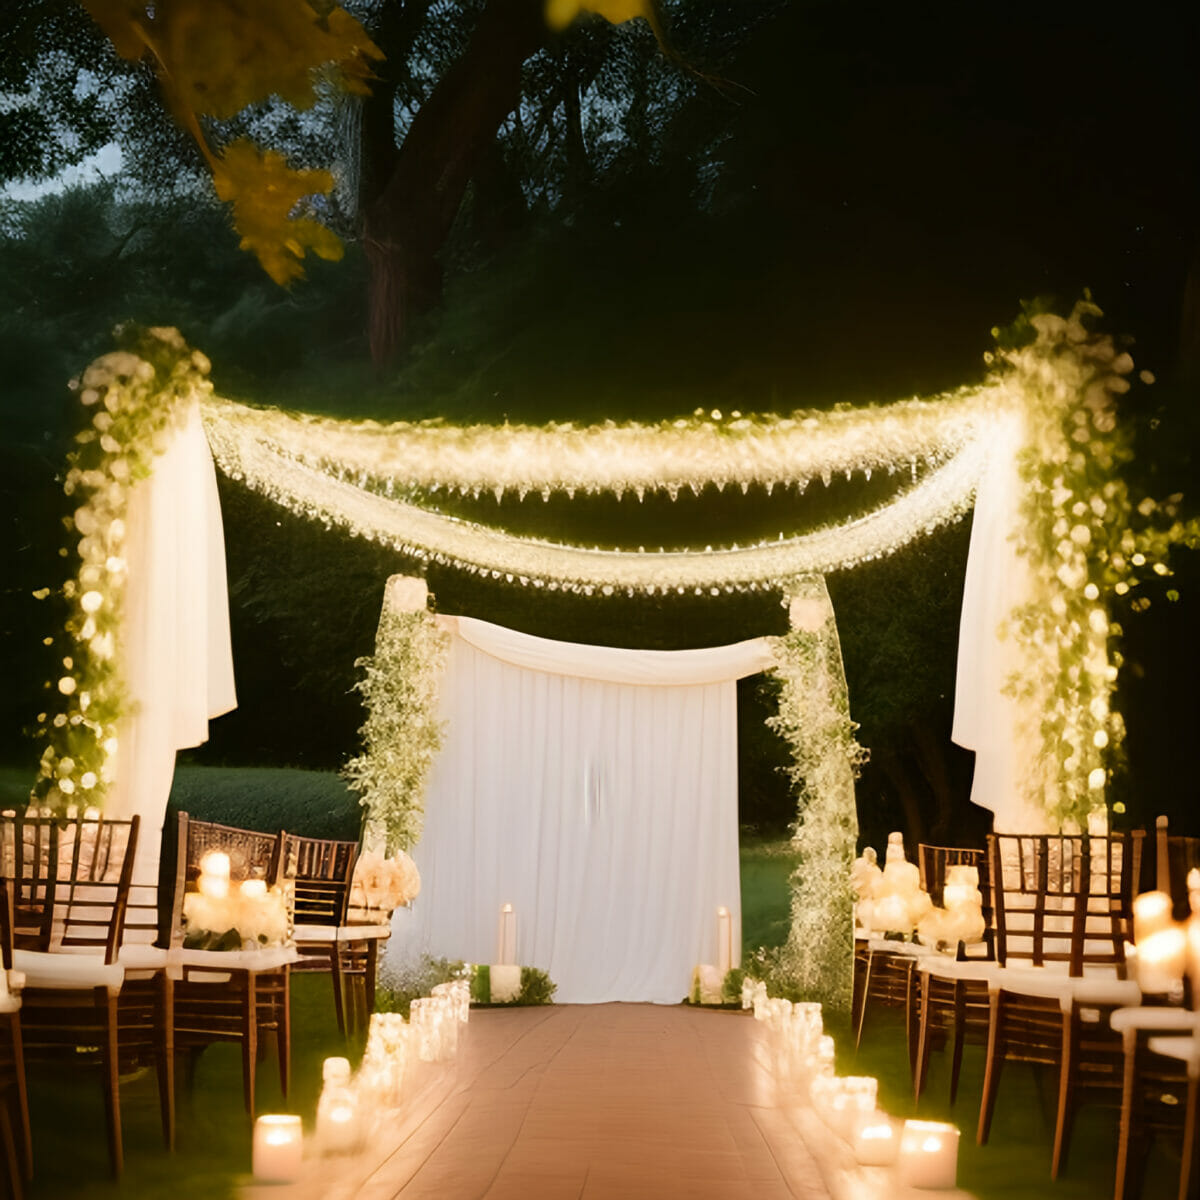 A simple outdoor setup with string lights and candles for a rustic lowkey wedding